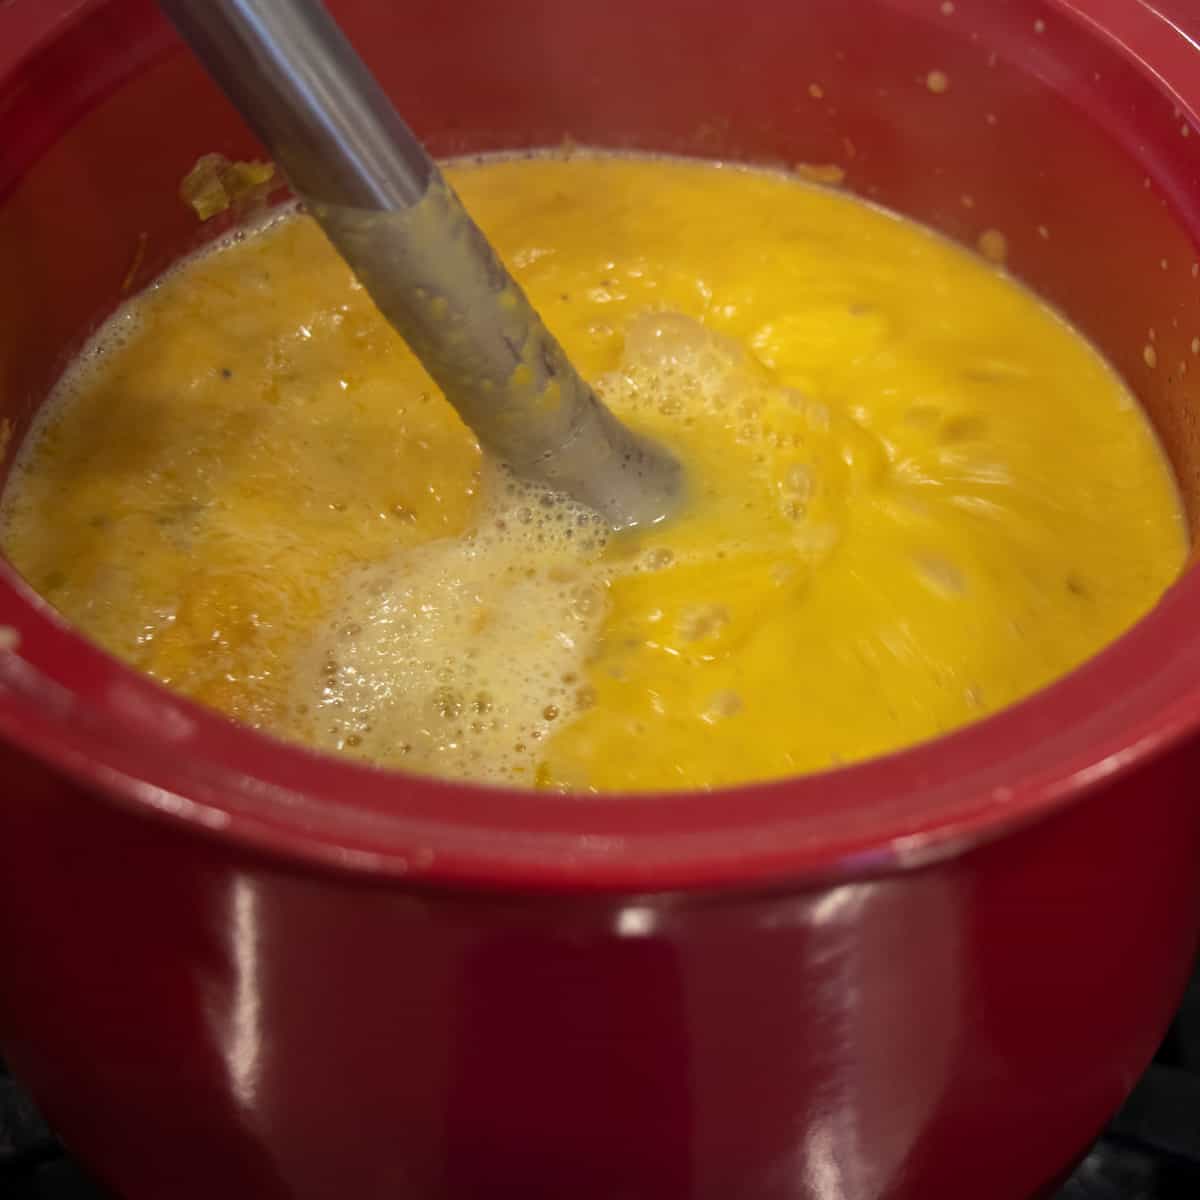 Making the soup creamy with an immersion blender.